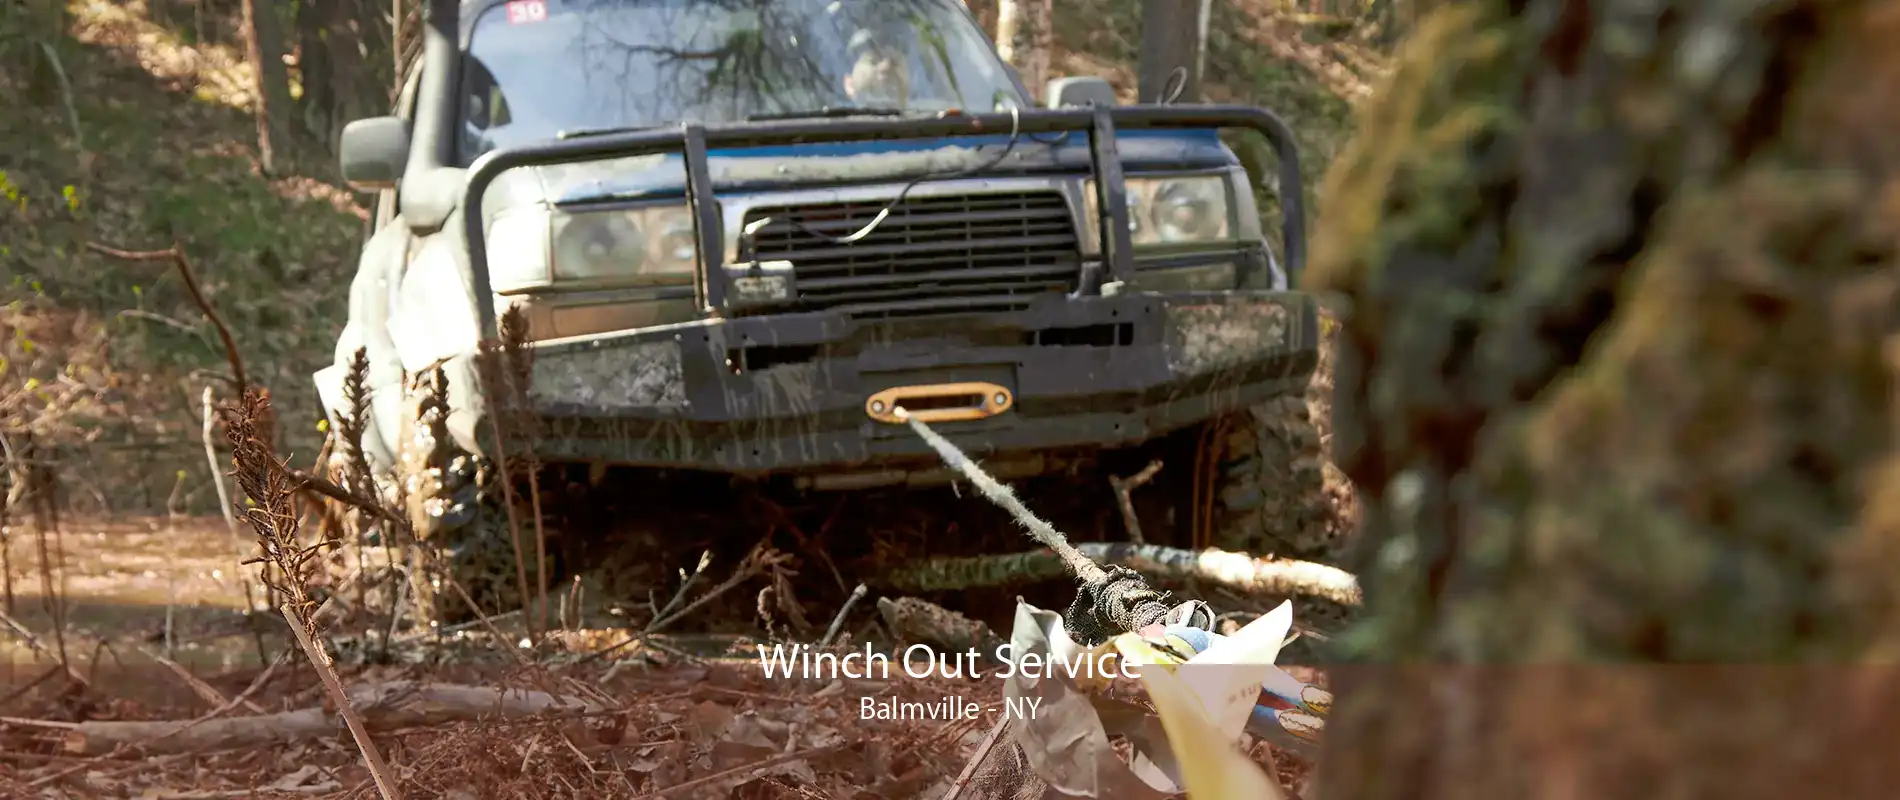 Winch Out Service Balmville - NY